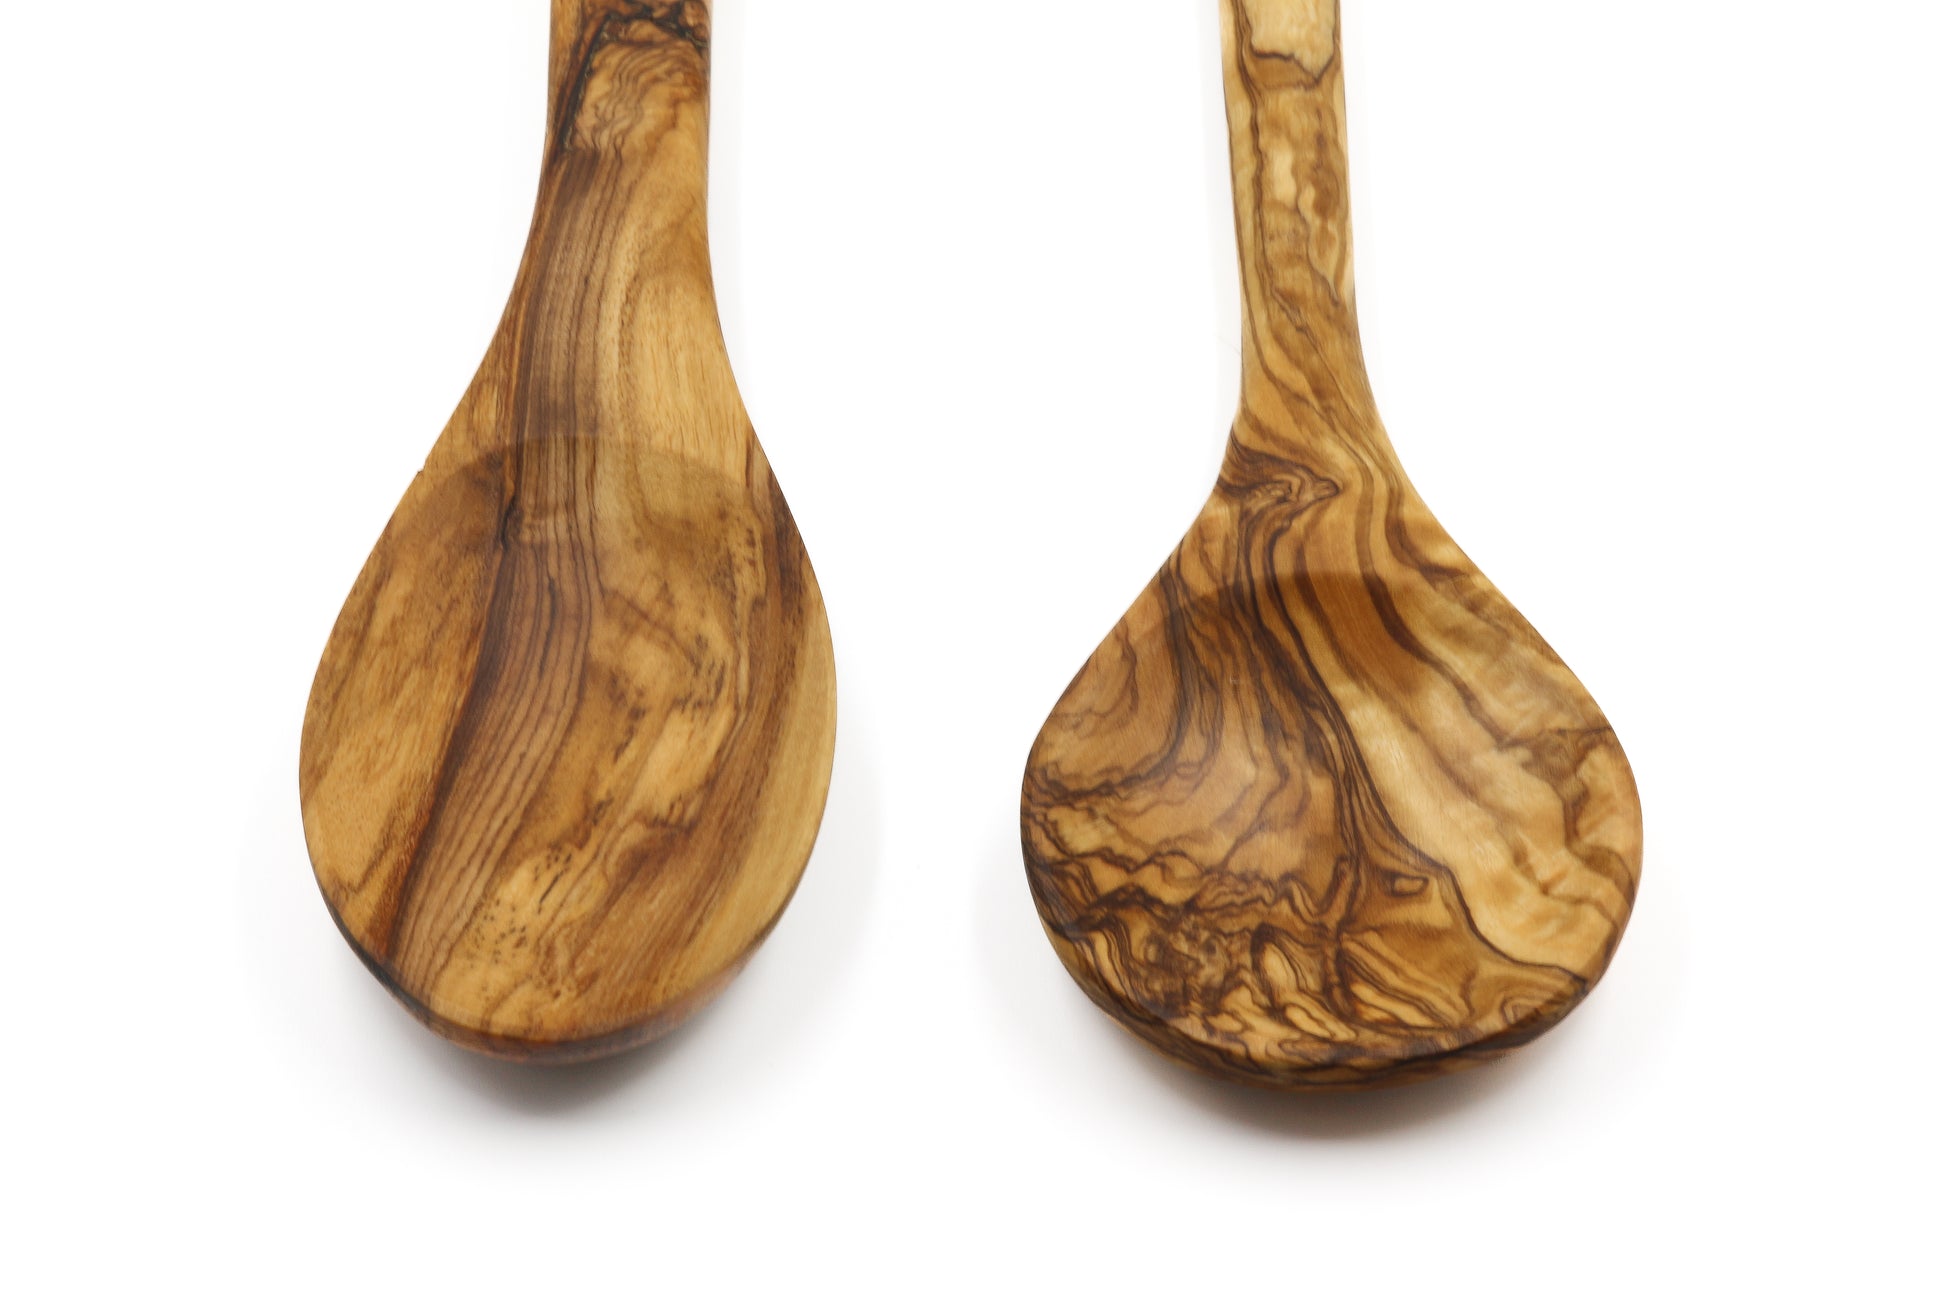 Upgrade your culinary arsenal with an olive wood stirring spoon